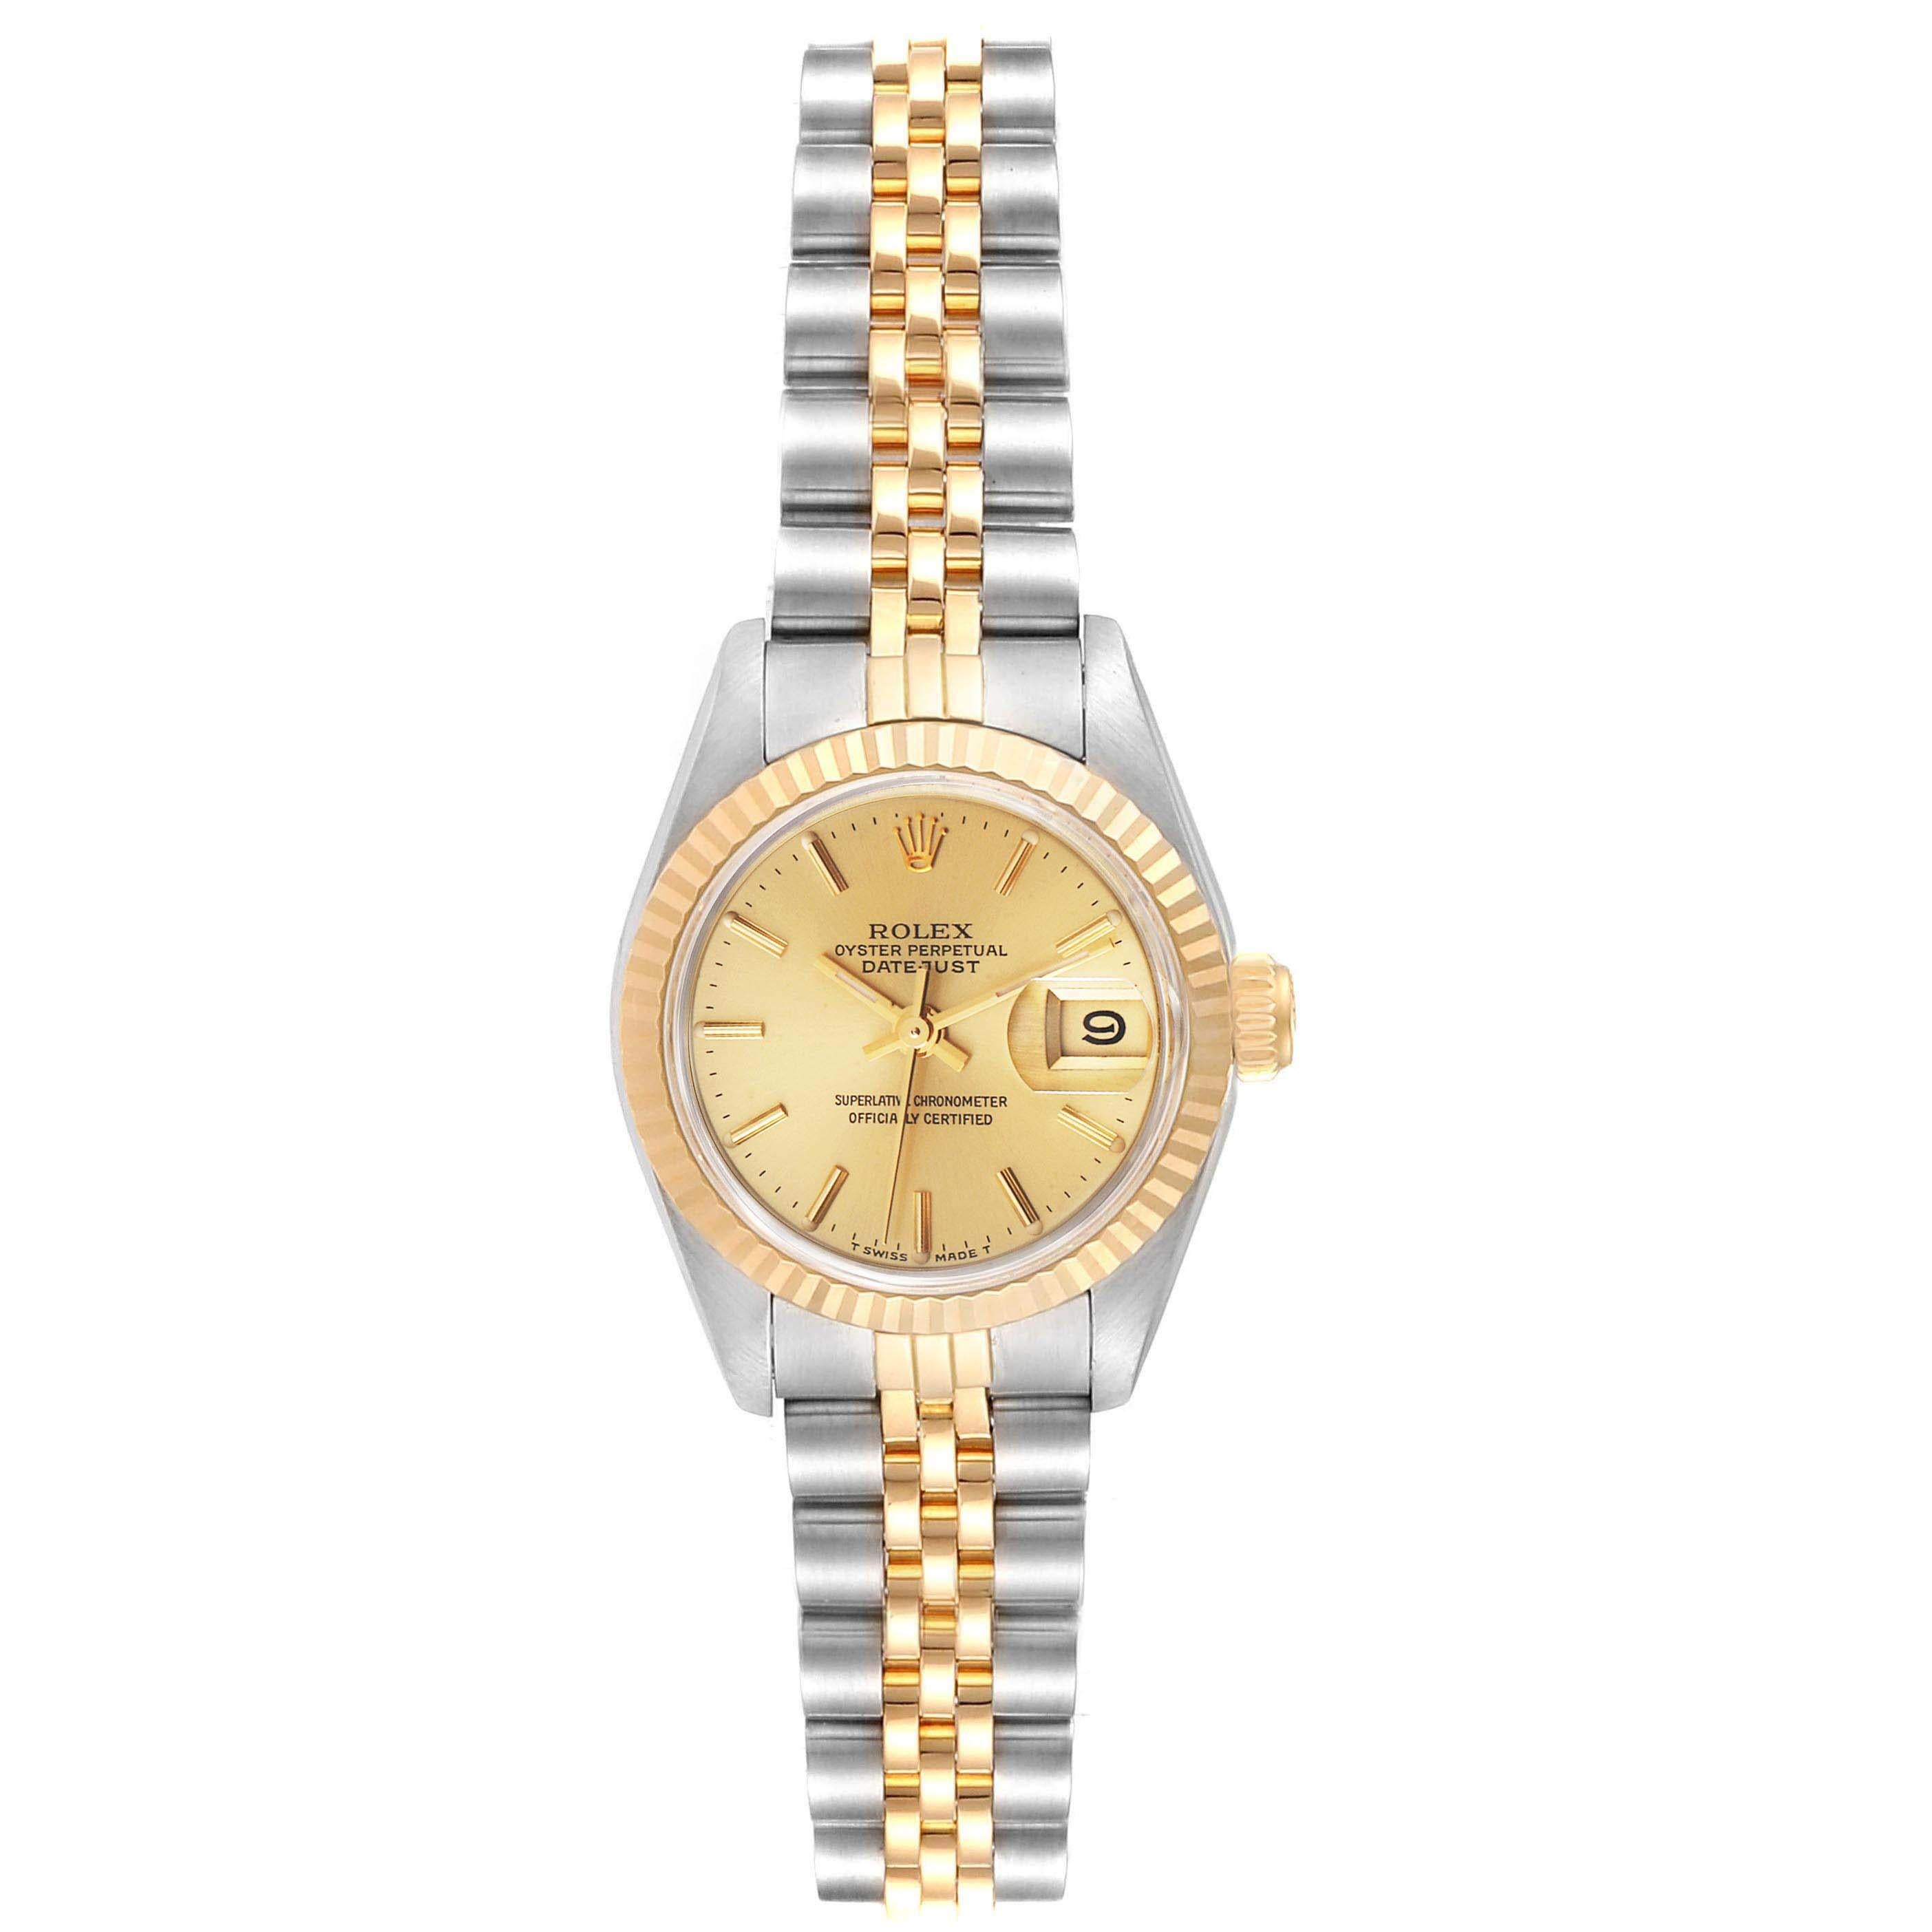 Rolex Datejust Steel Yellow Gold Ladies Watch 69173 Box Papers. Officially certified chronometer self-winding movement. Stainless steel oyster case 26 mm in diameter. Rolex logo on a crown. 18k yellow gold fluted bezel. Scratch resistant sapphire